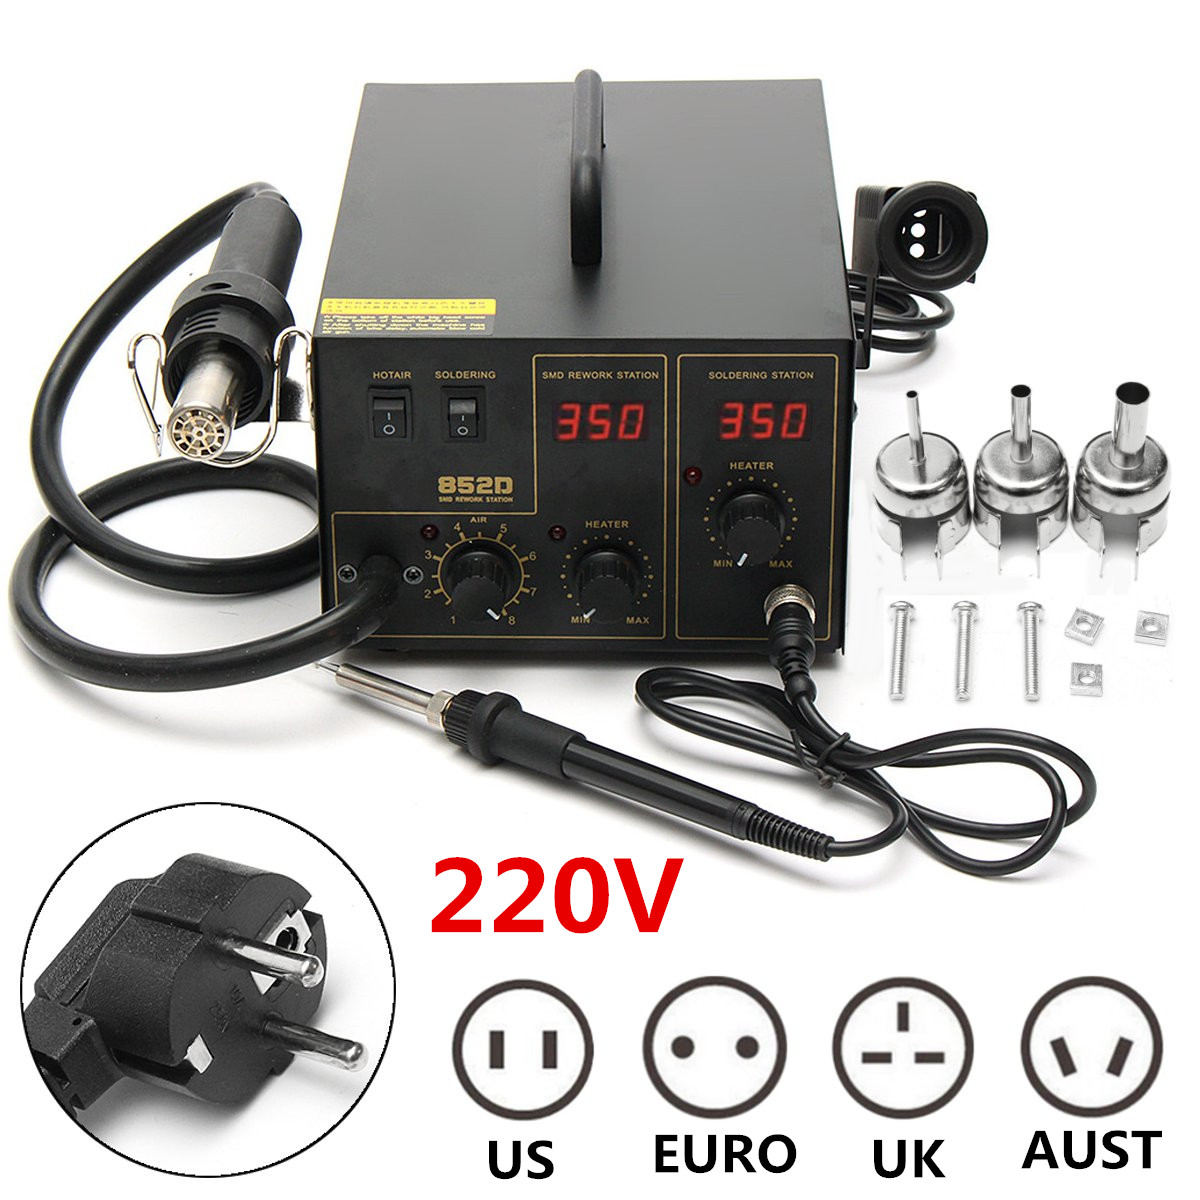 

852D 220V Adjustable Temperature 100°C-600°C Double Display Soldering Rework Station Solder Iron SMD with Hot Air Gun